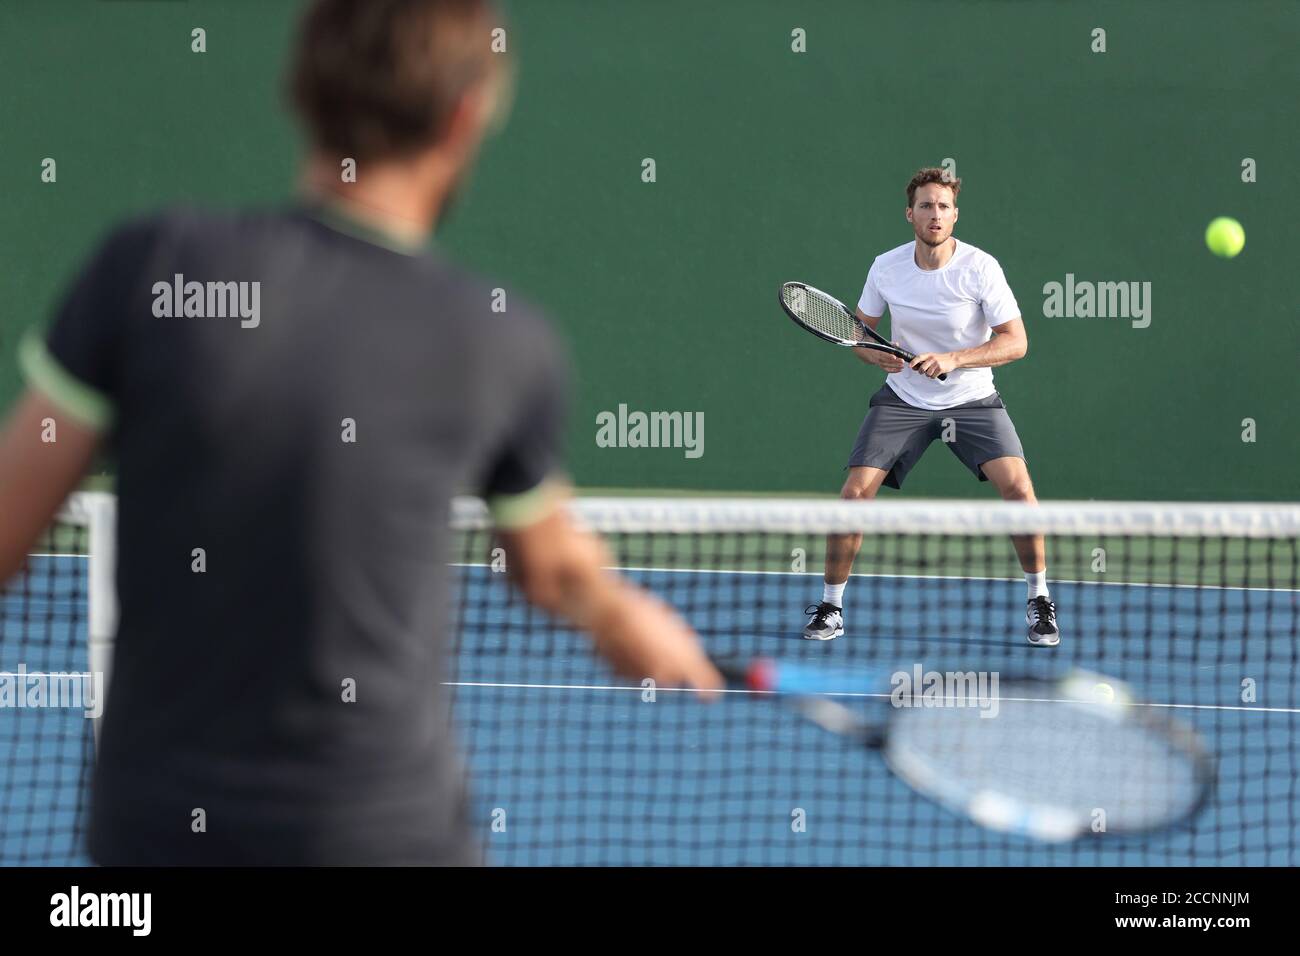 Men sport athletes players playing tennis match together. Two professional tennis players hitting ball on hard outdoor court during game Stock Photo